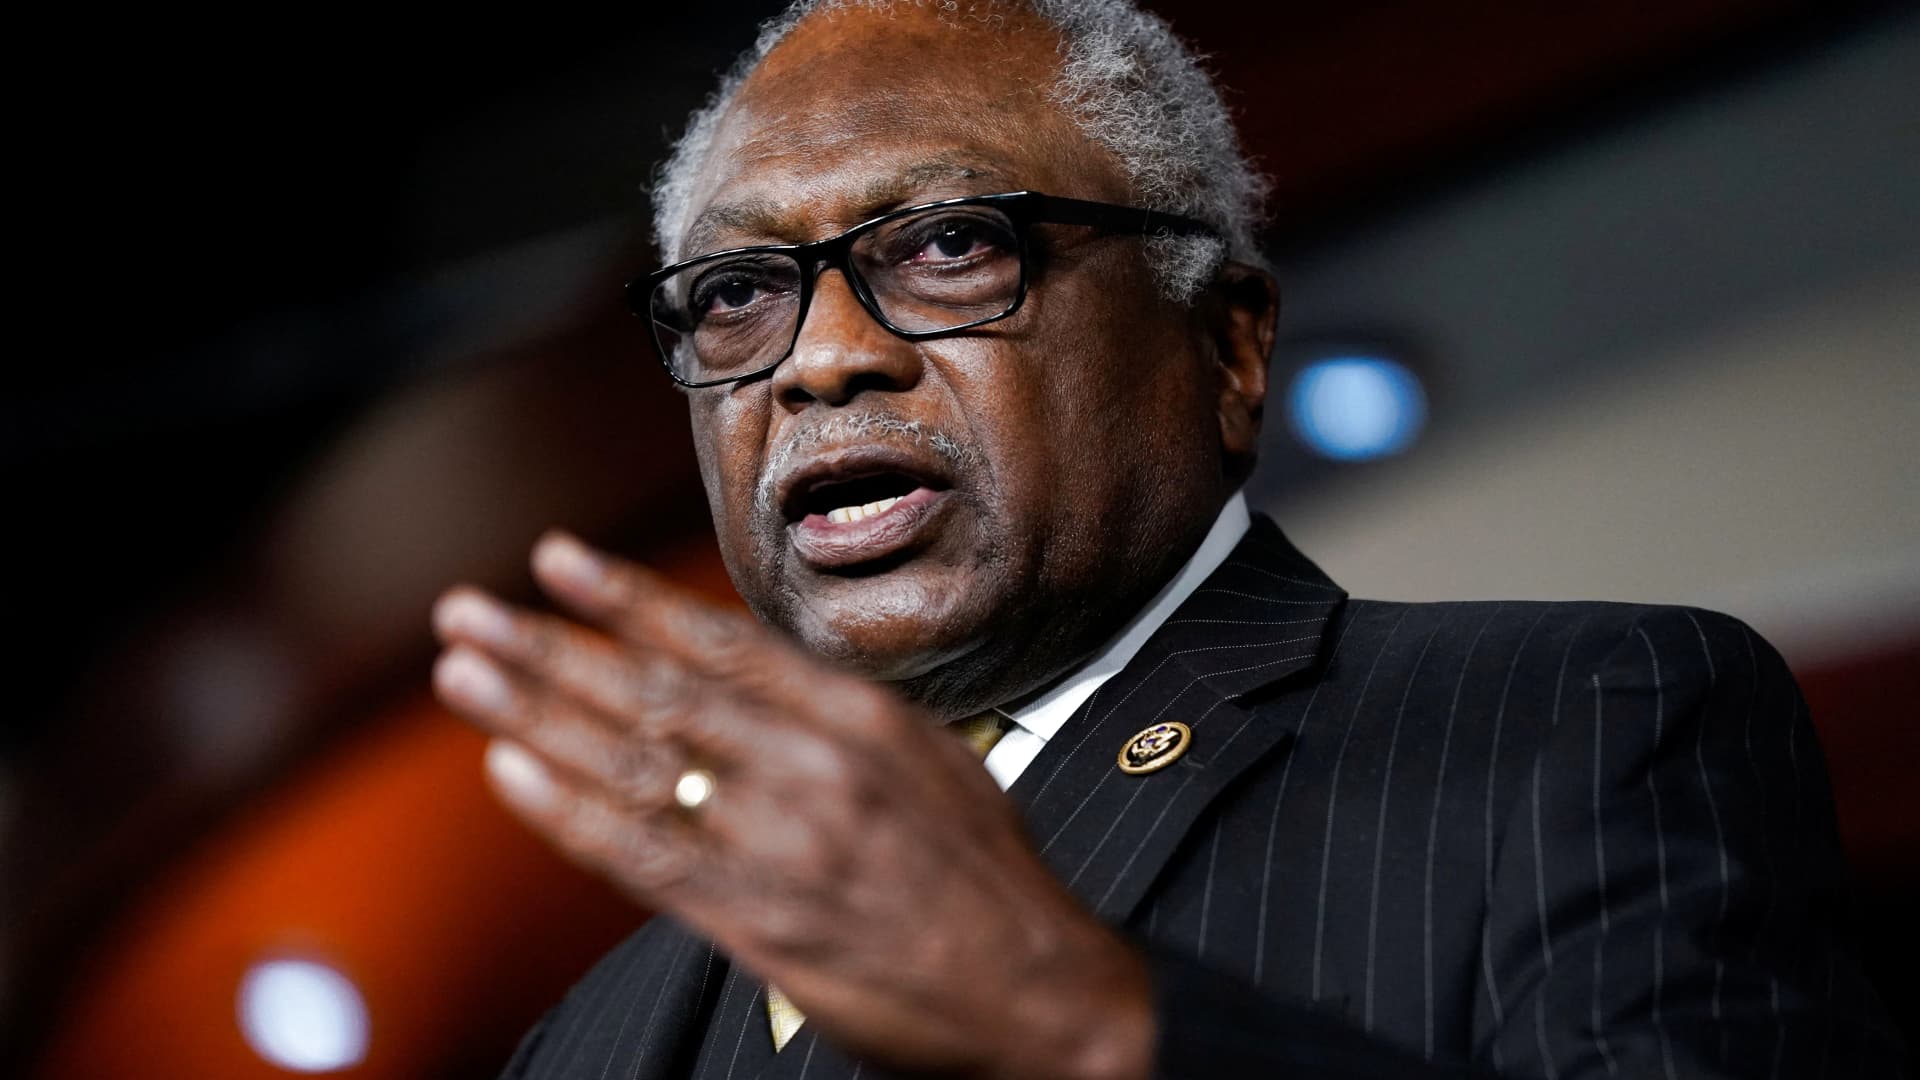 TransUnion, Equifax, Experian may have violated credit reporting rules, says Rep.  Jim Clyburn